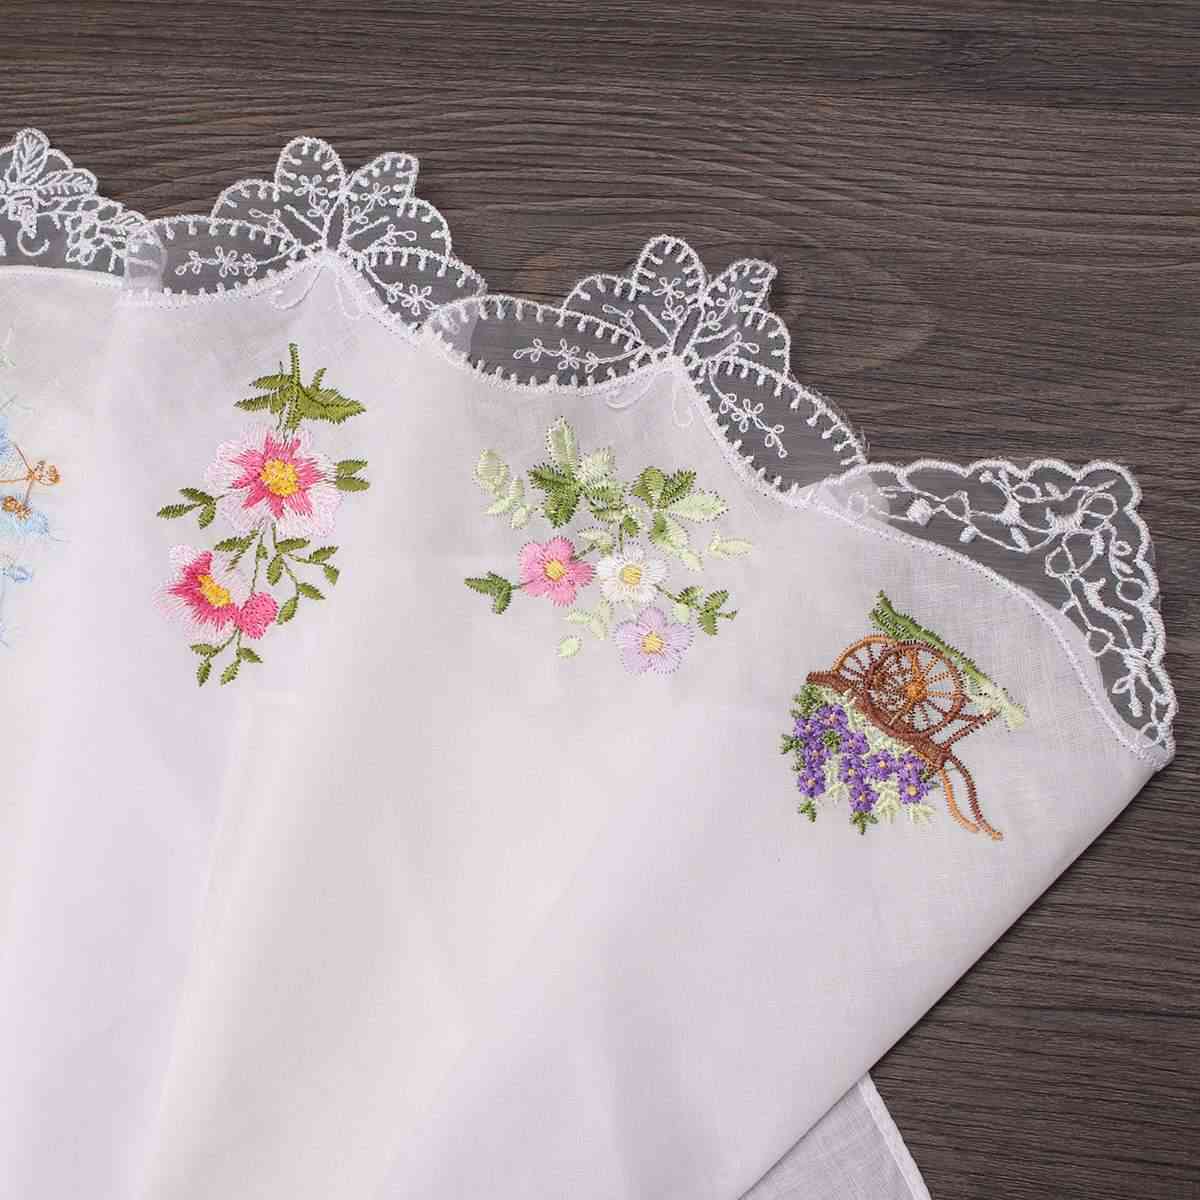 Vintage Cotton Women Hankies Embroidered Butterfly Lace Flower Hanky